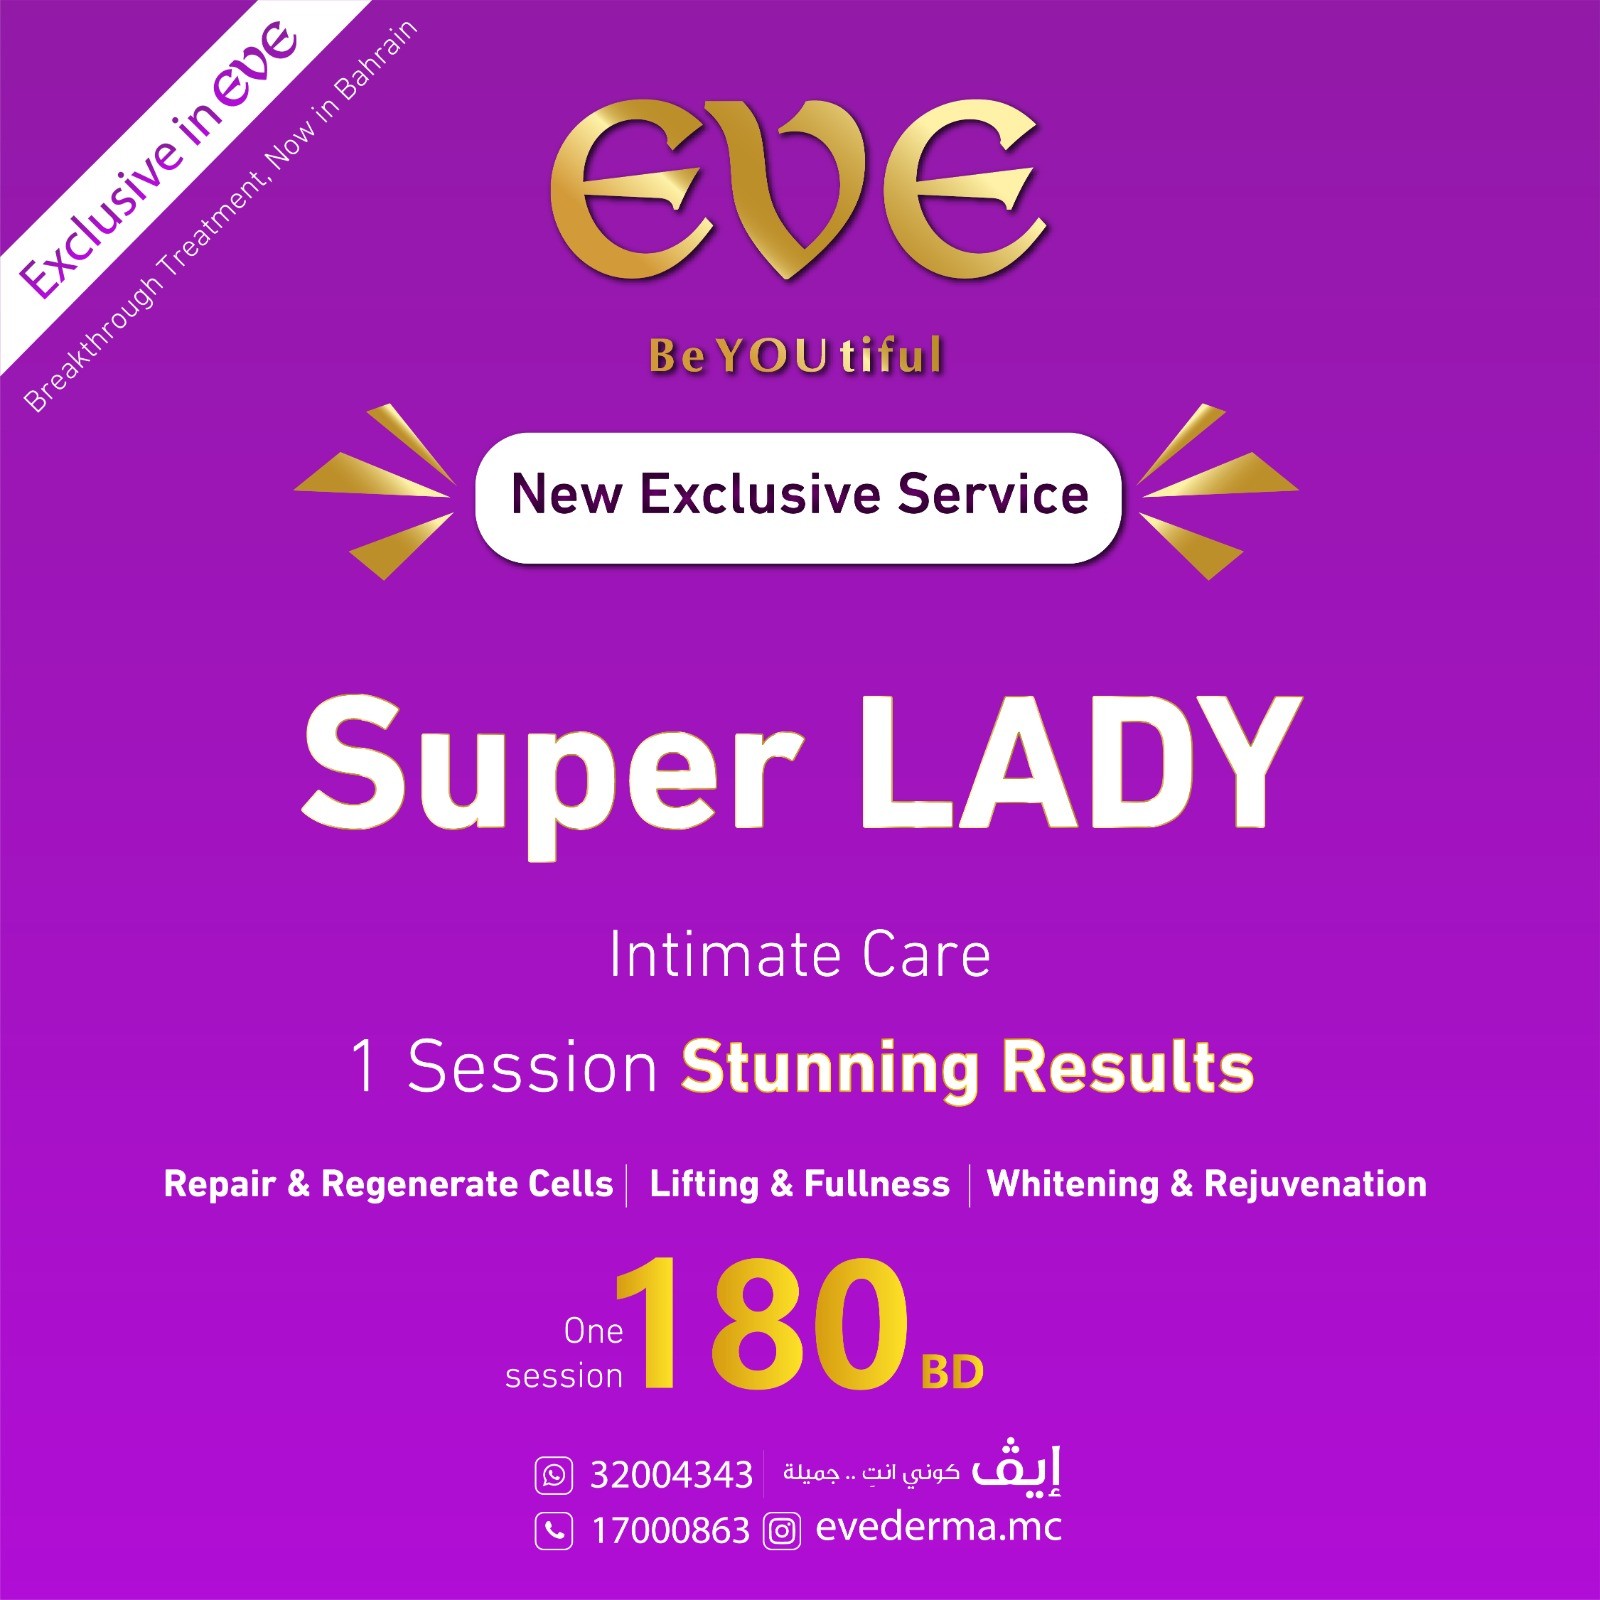 SUPER LADY NEW Exclusive Service in EVE - For Ladies ONLY